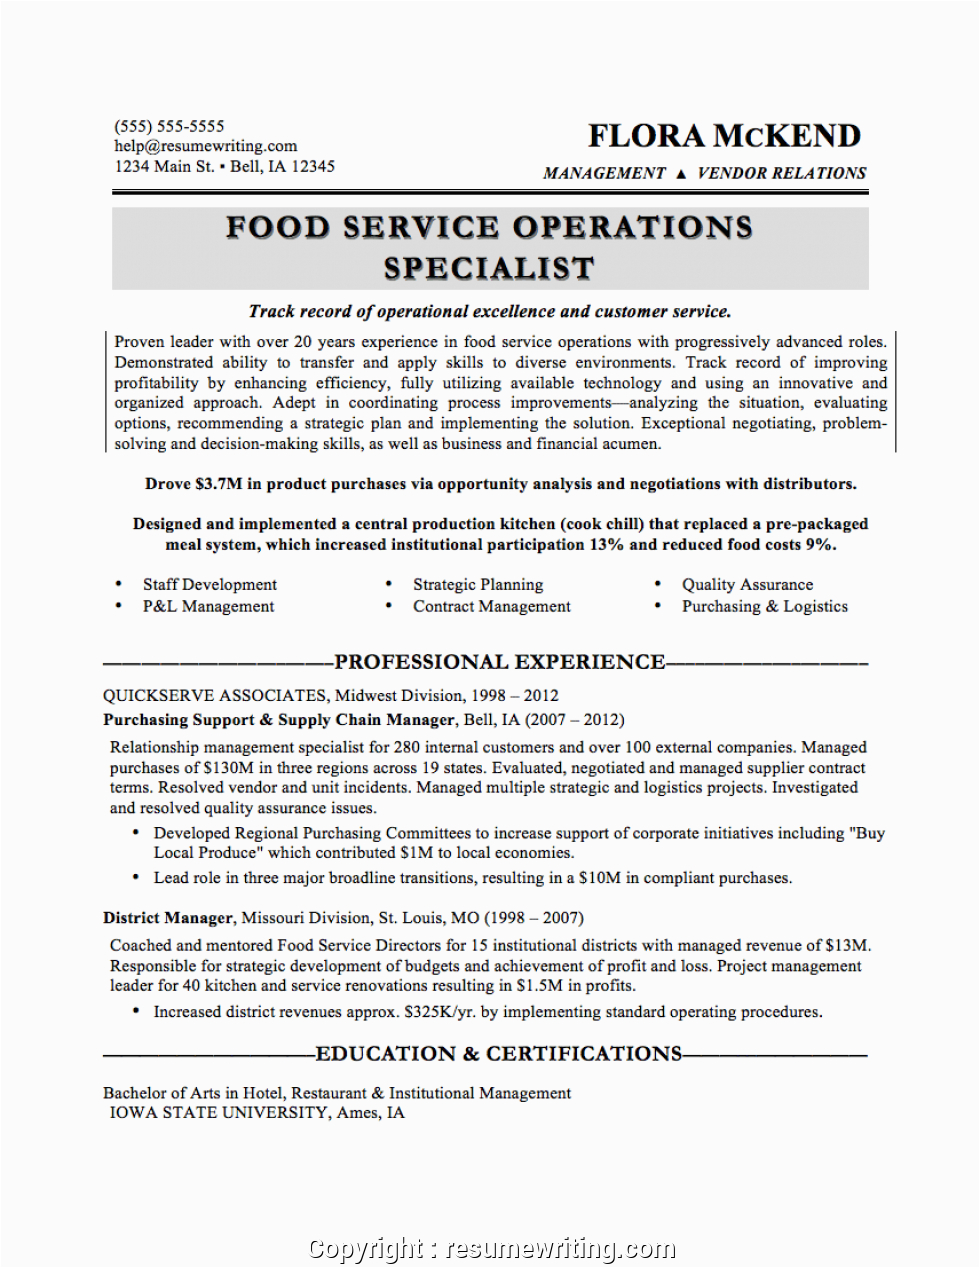 Sample Resume Objectives for Food Service Print Food Service Customer Service Resume Sample Resumes